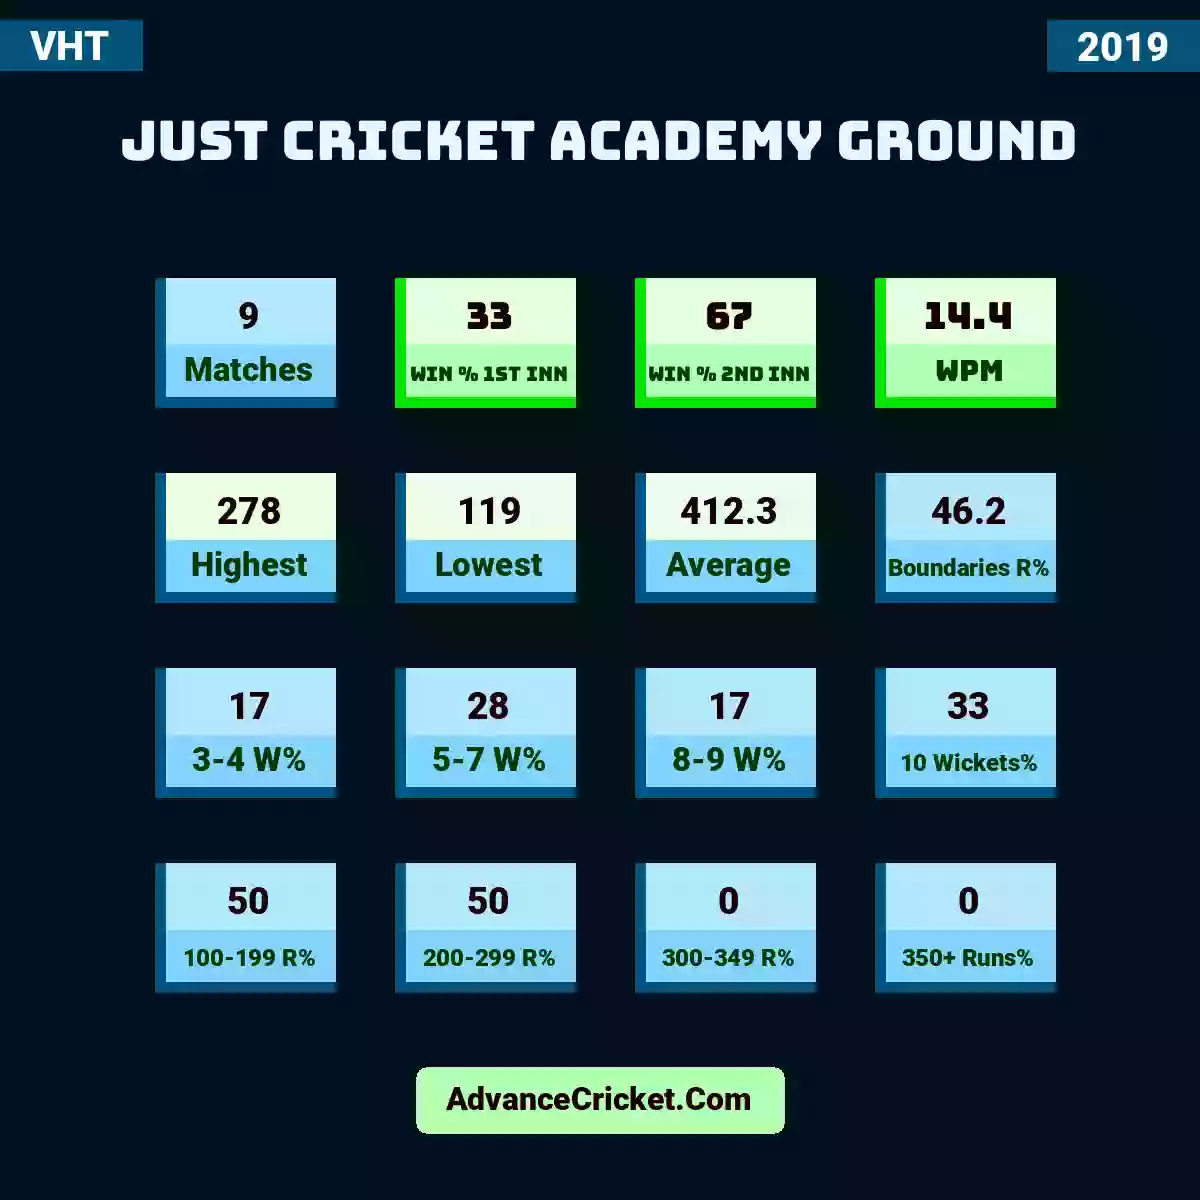 Image showing Just Cricket Academy Ground with Matches: 9, Win % 1st Inn: 33, Win % 2nd Inn: 67, WPM: 14.4, Highest: 278, Lowest: 119, Average: 412.3, Boundaries R%: 46.2, 3-4 W%: 17, 5-7 W%: 28, 8-9 W%: 17, 10 Wickets%: 33, 100-199 R%: 50, 200-299 R%: 50, 300-349 R%: 0, 350+ Runs%: 0.